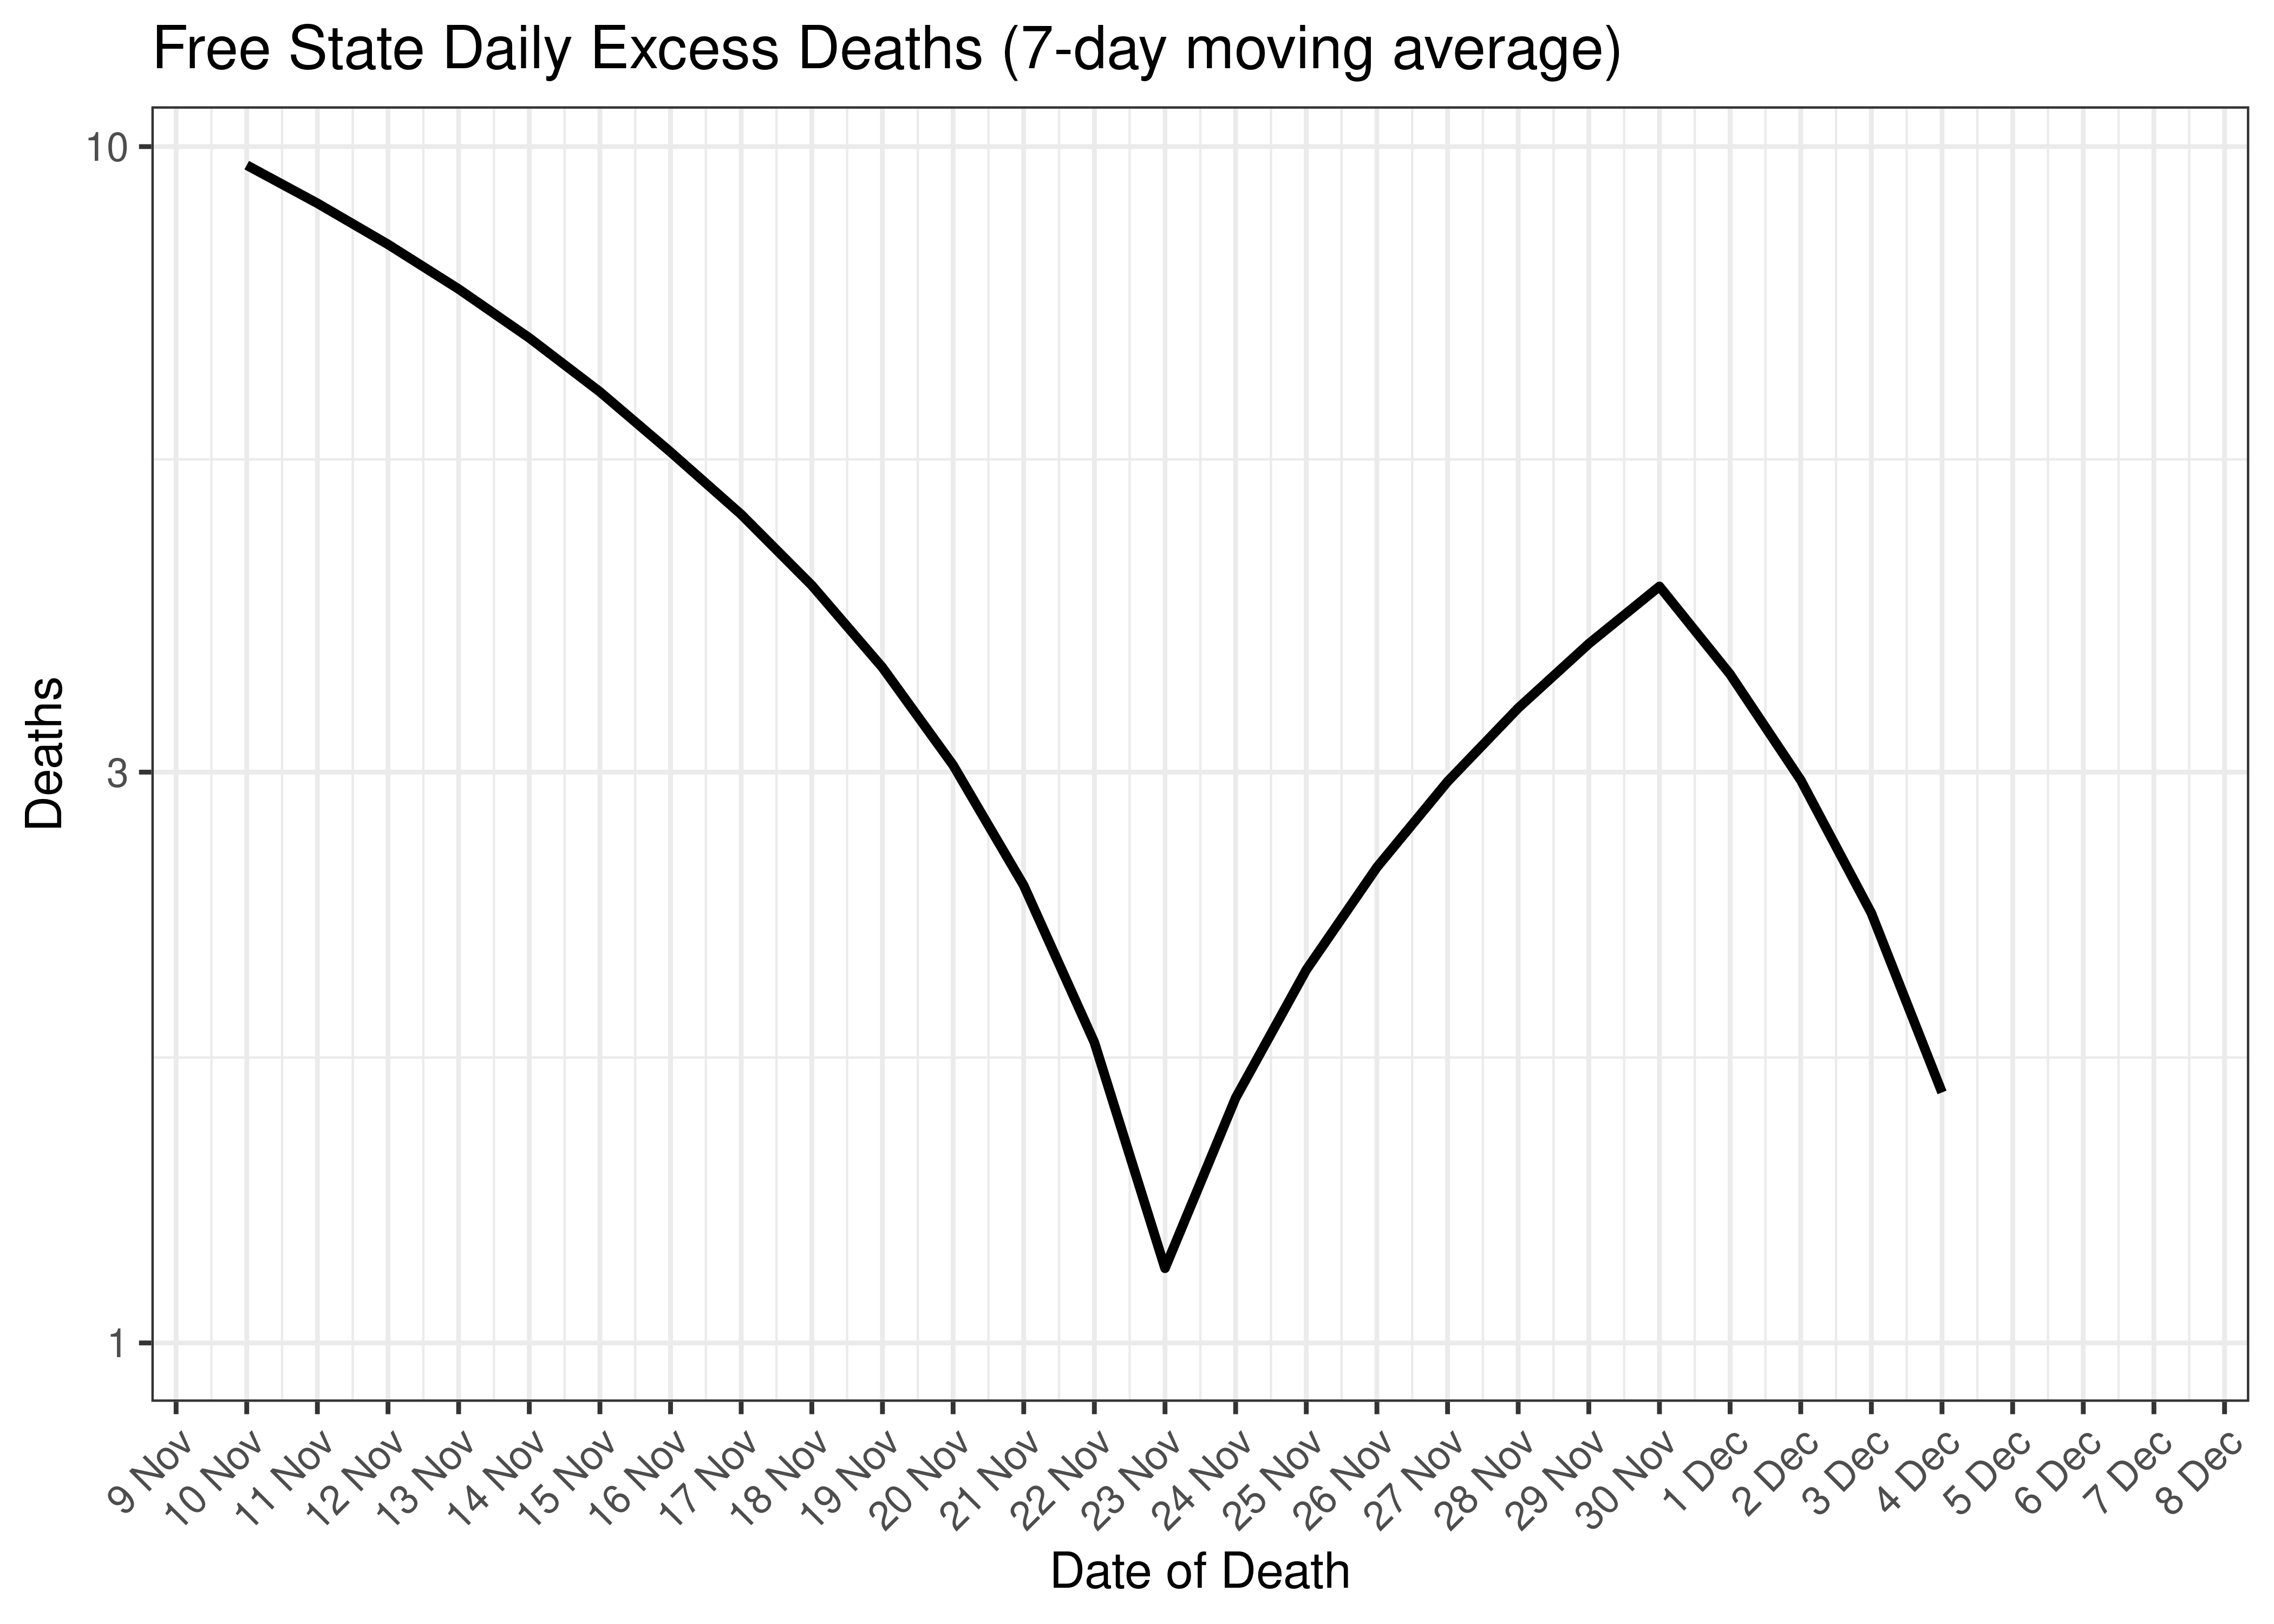 Free State Daily Excess Deaths for Last 30-days (7-day moving average)